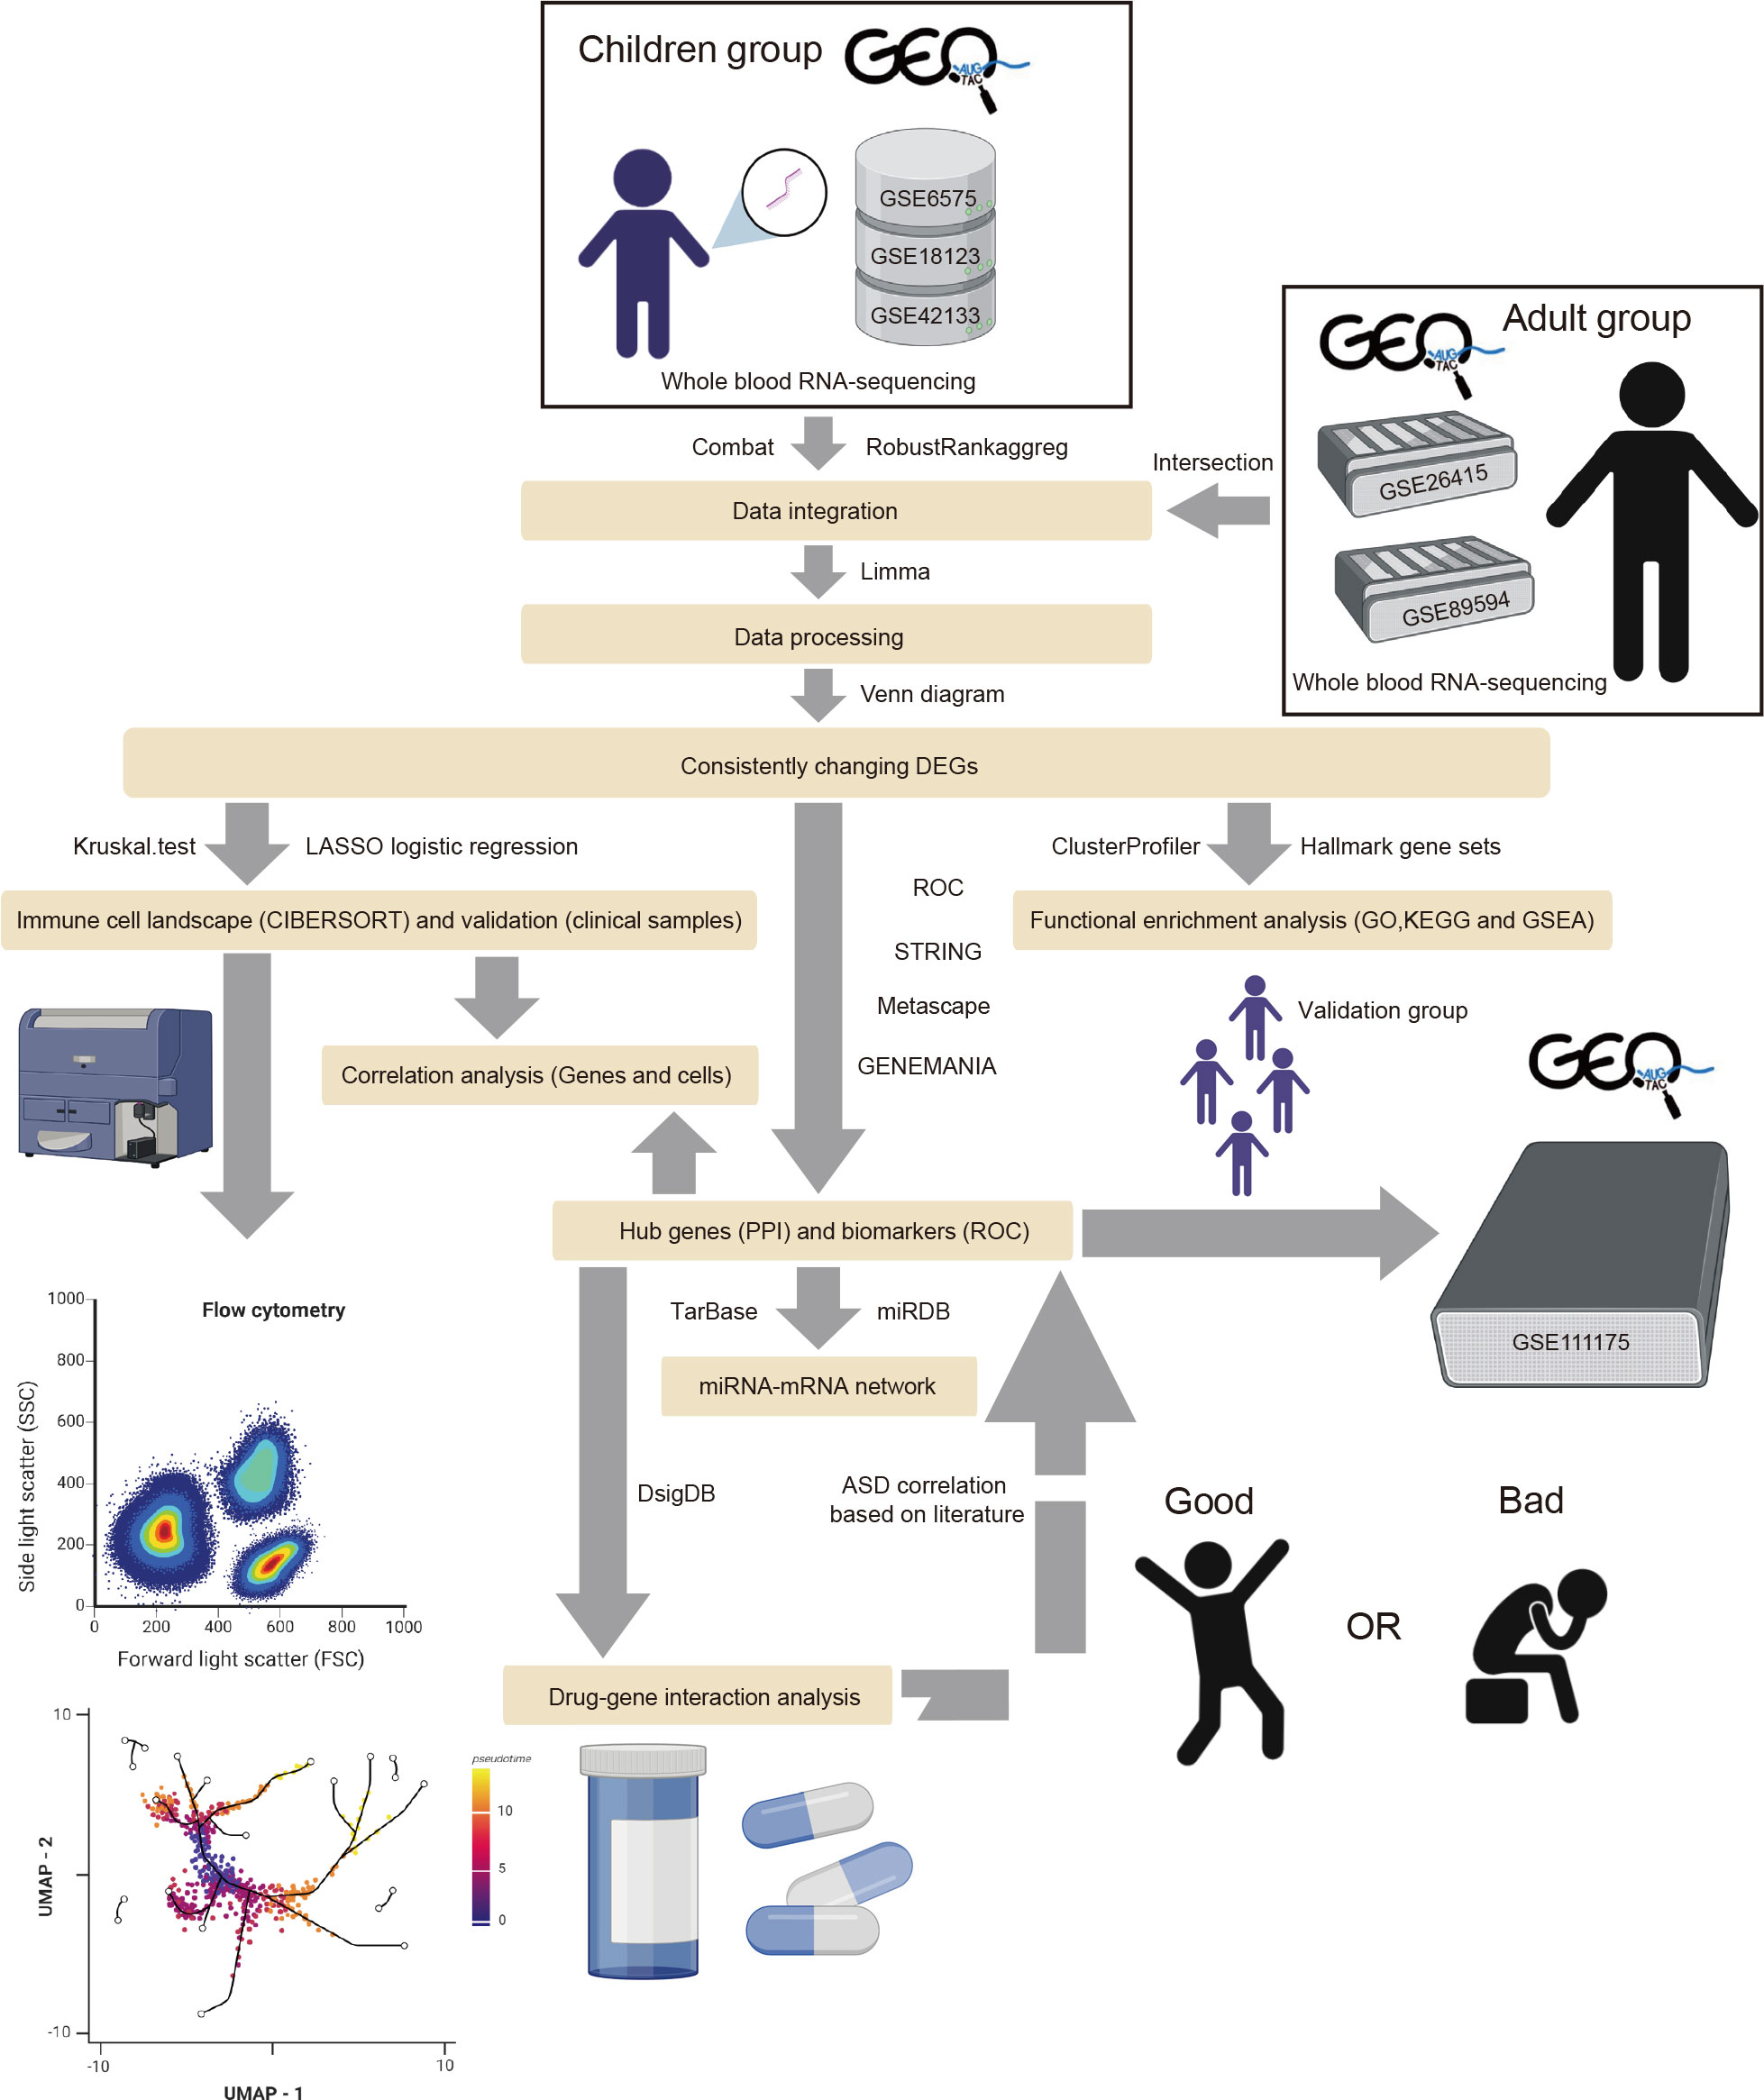 Frontiers | Novel insights into the immune cell landscape and gene 